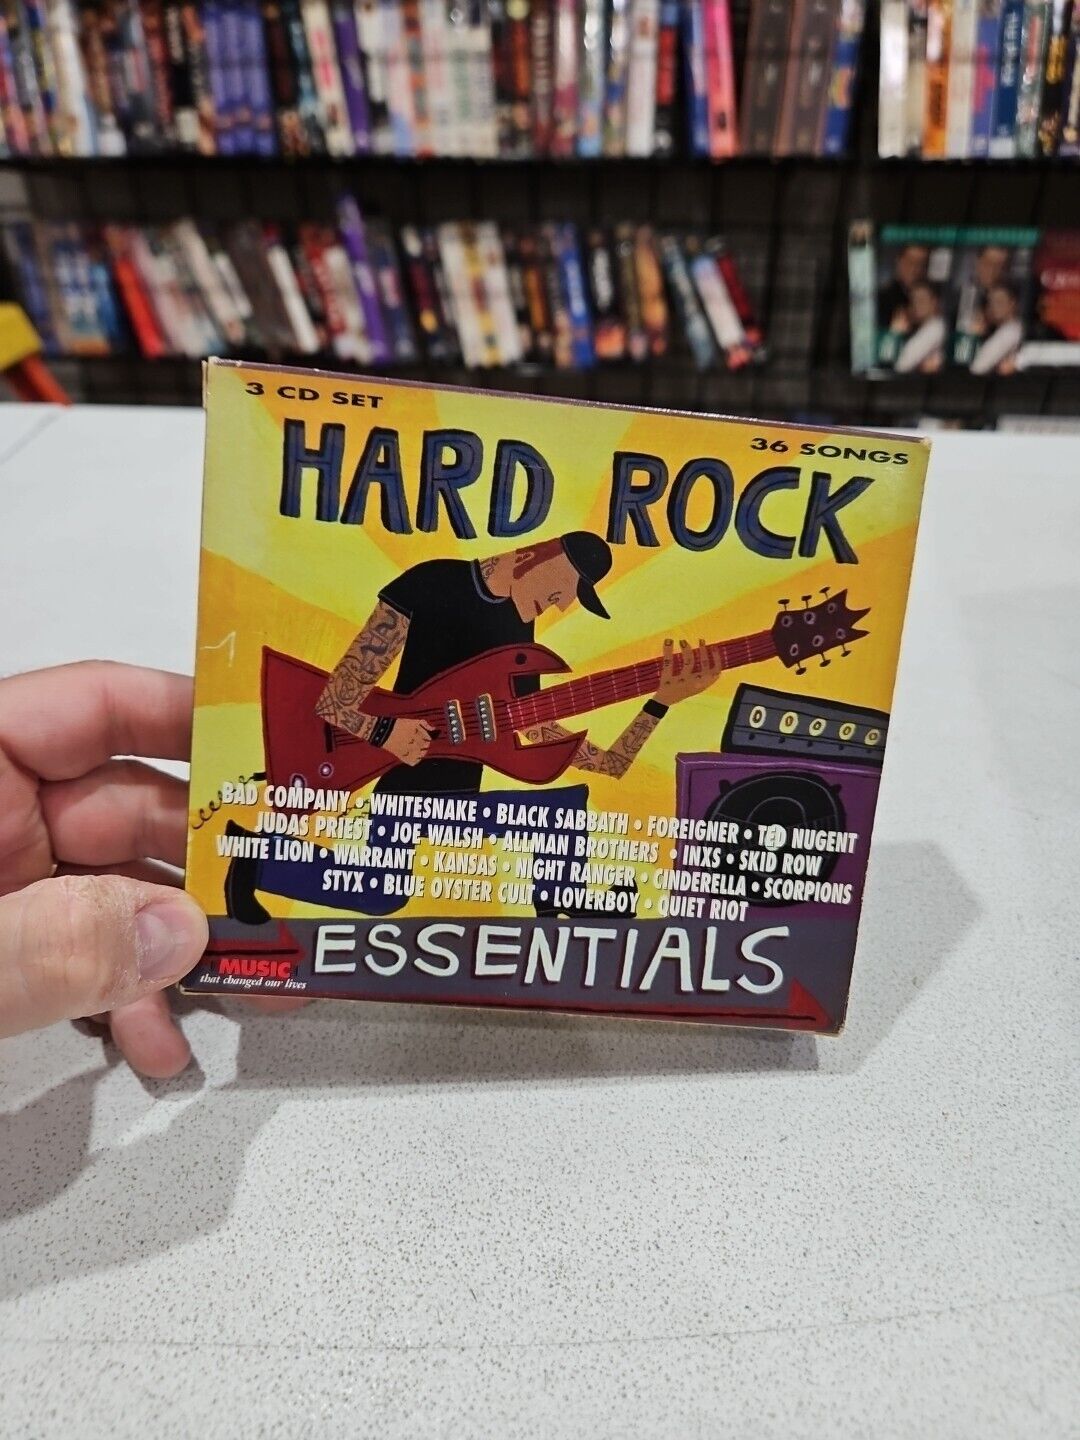 HARD ROCK ESSENTIALS - Self-Titled - 3 CD 📀 BUY 2 GET 1 FREE 🇺🇸 SHIPPED 